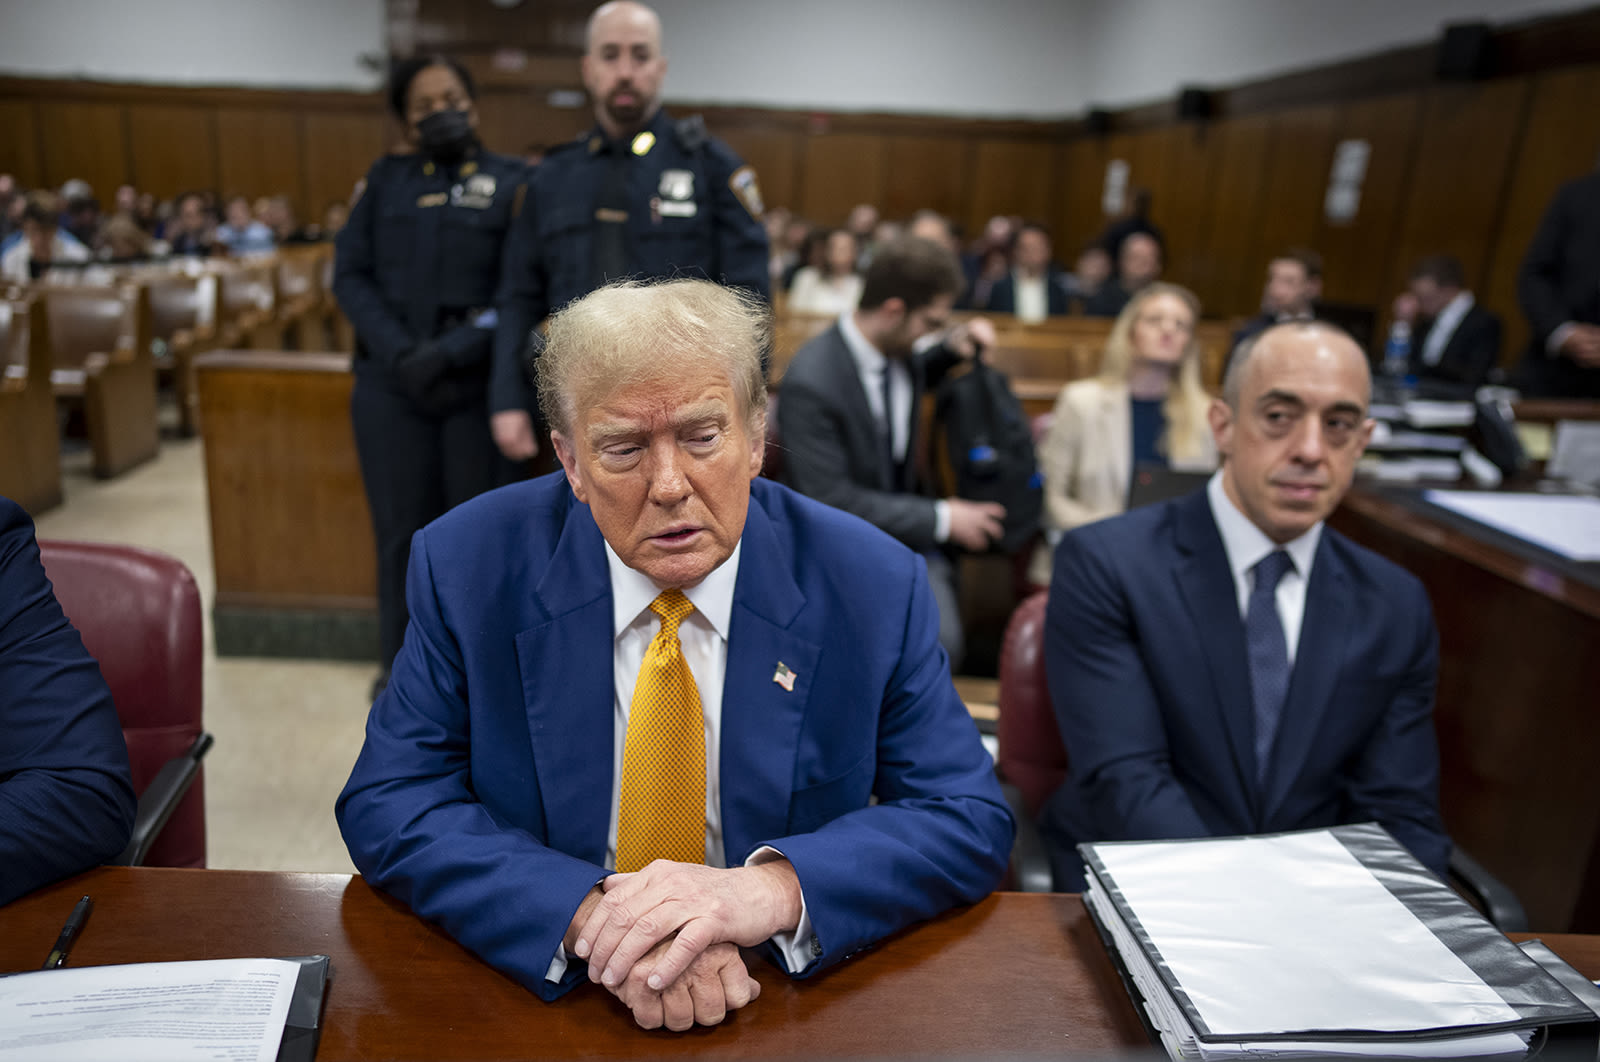 Judge corrects Trump claim he “can’t testify” in hush money trial due to gag order: live updates